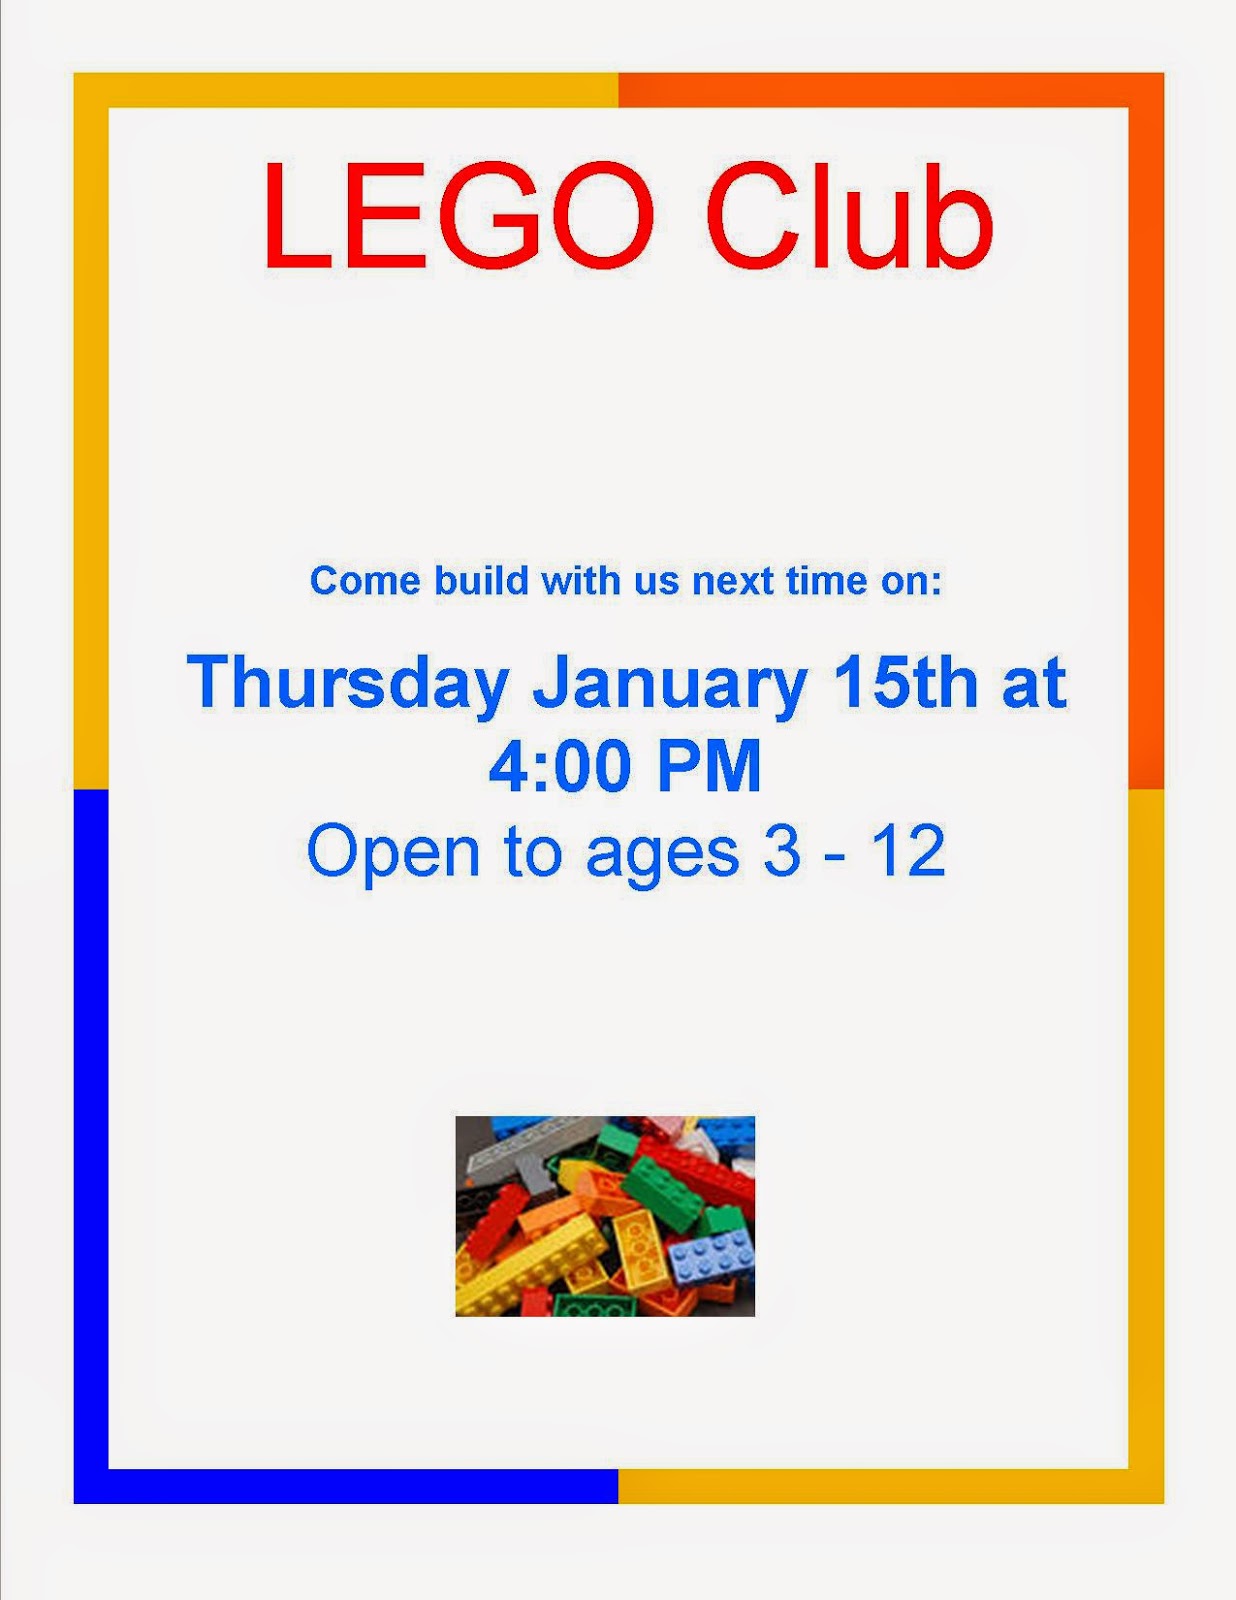 LEGO Club at the Franklin Library